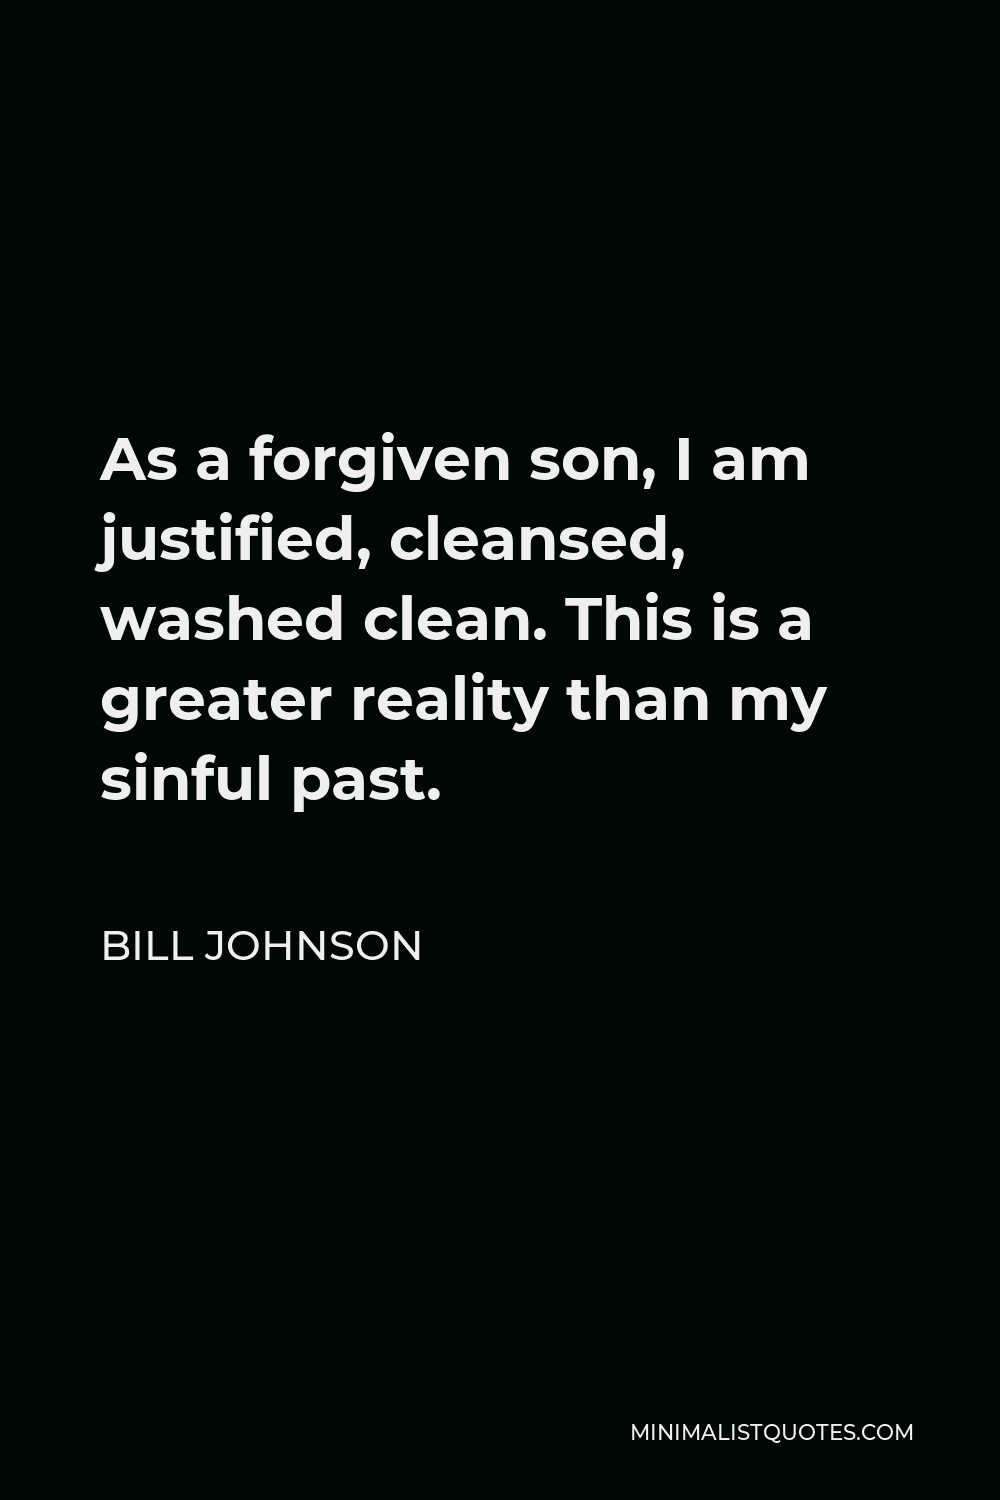 Bill Johnson Quote - As a forgiven son, I am justified, cleansed, washed clean. This is a greater reality than my sinful past.